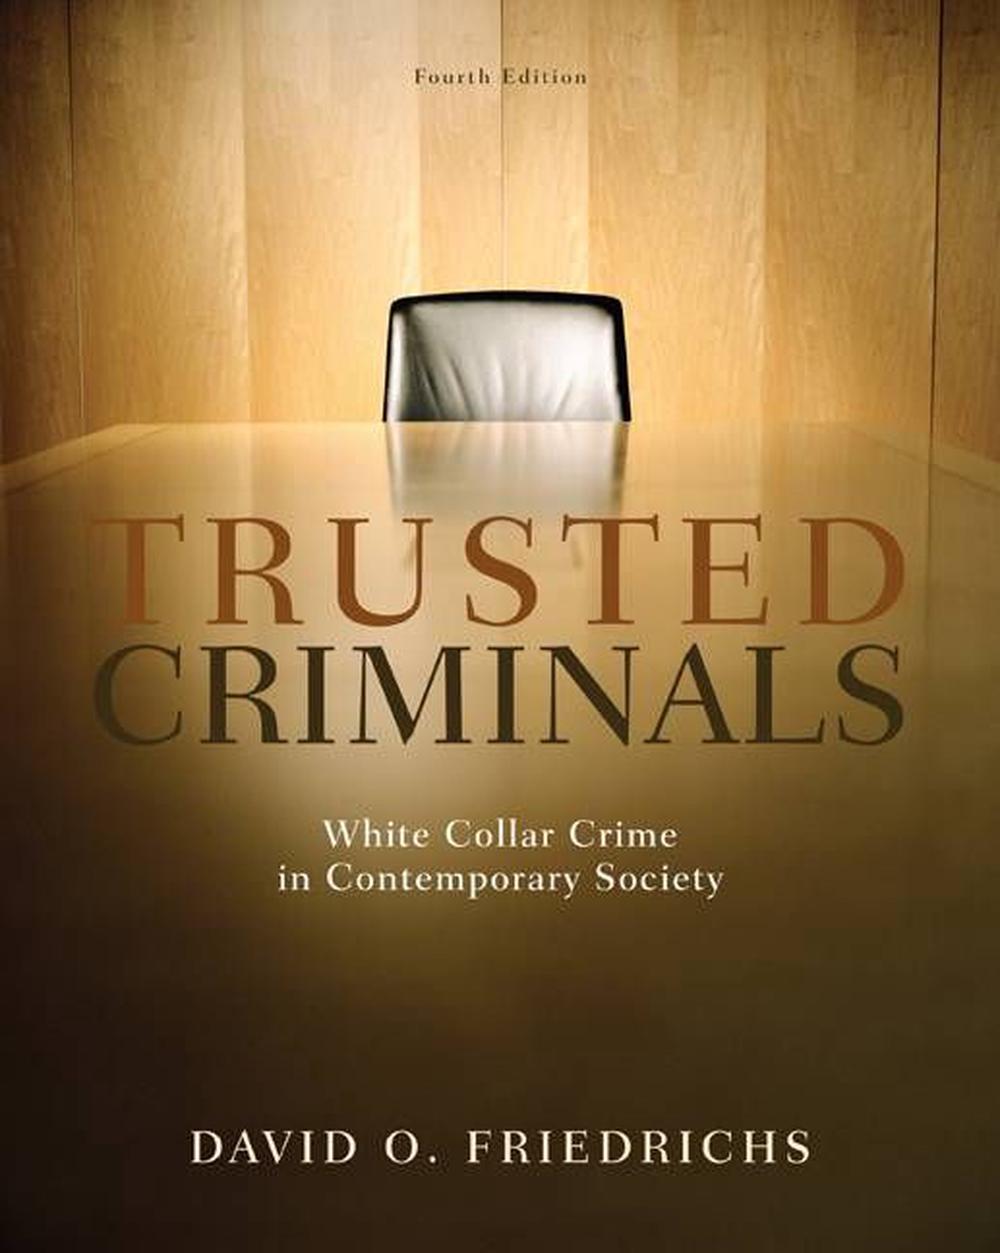 Trusted Criminals White Collar Crime in Contemporary Society 4th